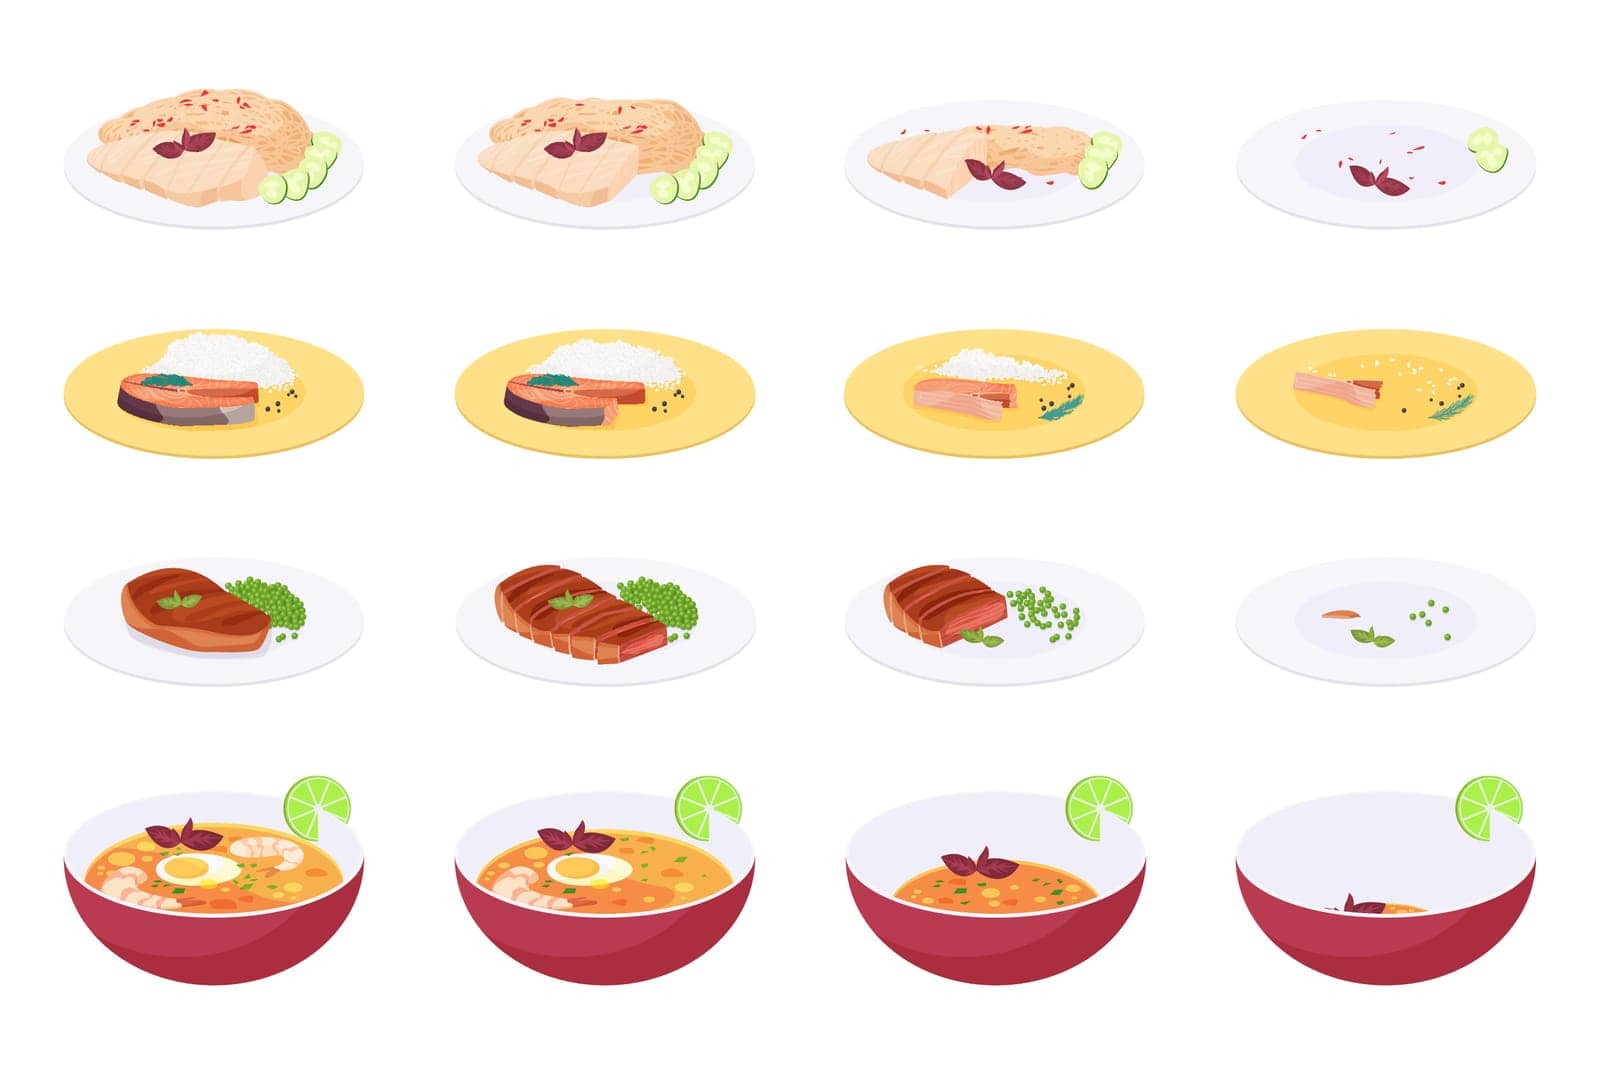 Eaten dinner food set, sequence game animation. Animated stages of eating portion of healthy dishes, plates of meat and fish steak served with garnish, bowl of shrimp soup cartoon vector illustration